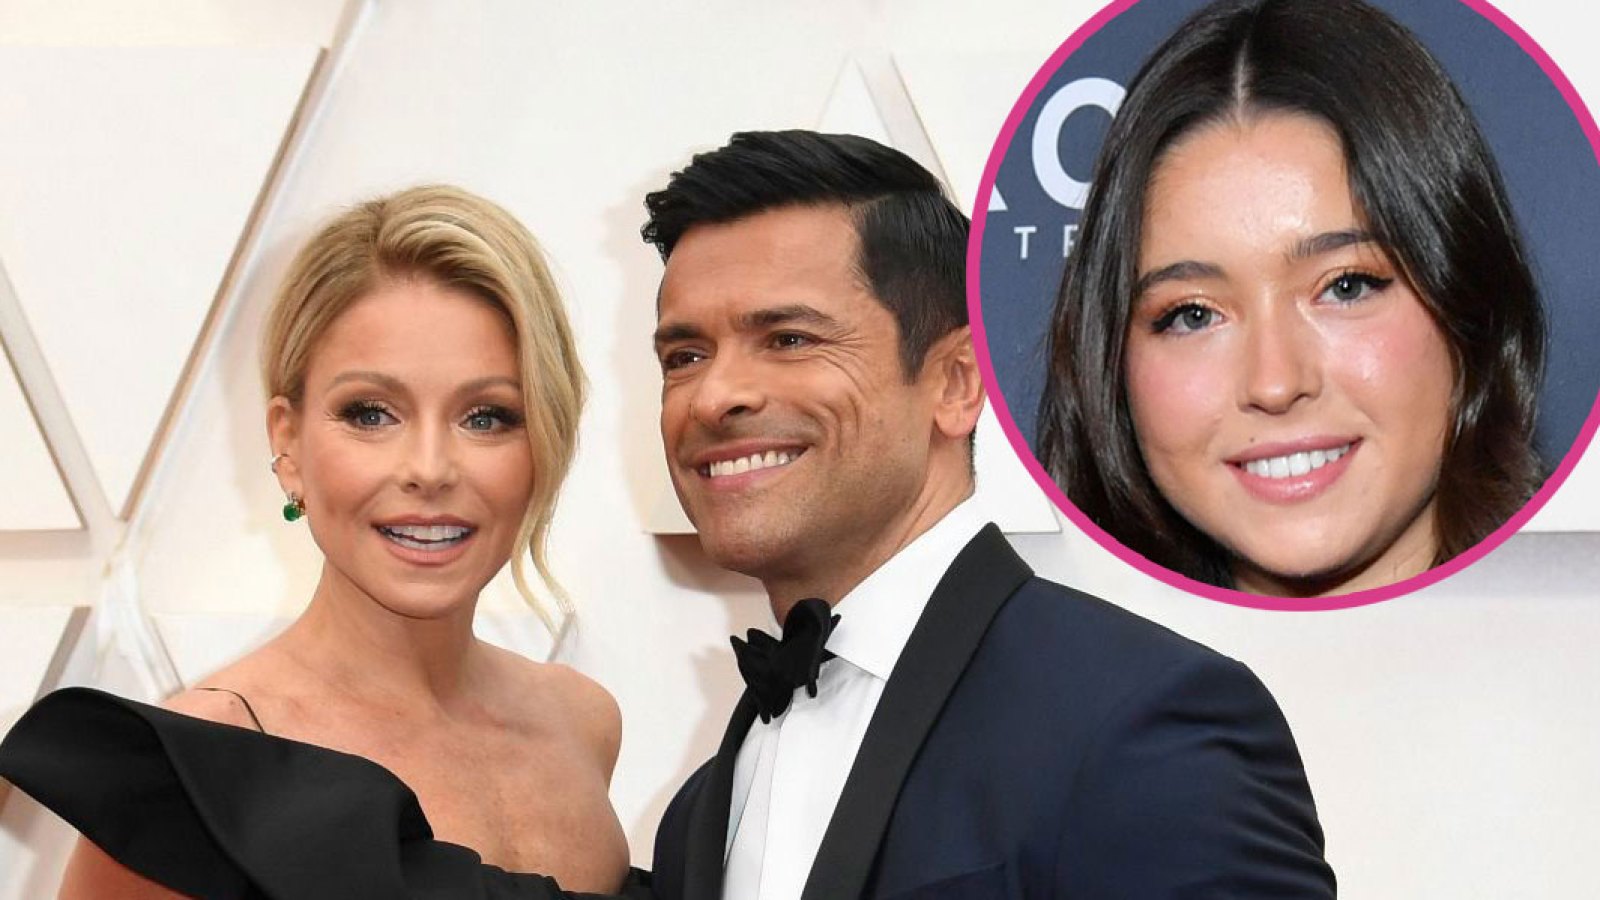 Kelly Ripa and Mark Consuelos Warn Daughter Lola About Their 'Freaky Week': 'Anything You Walk In On Is Your Problem' blue suit